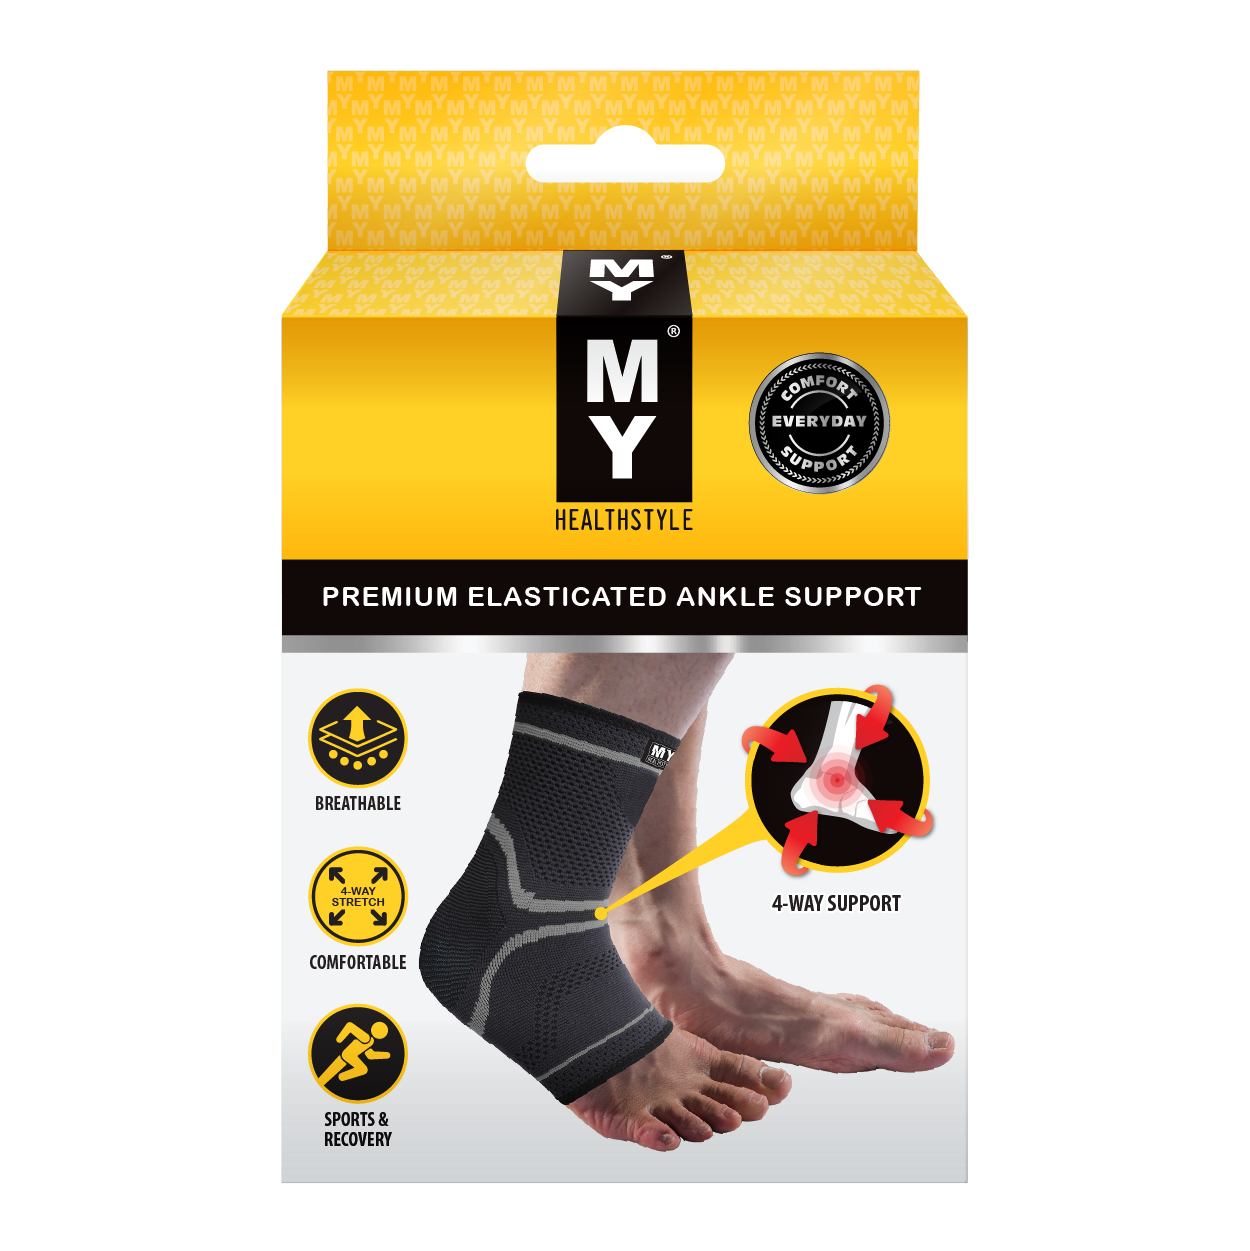 MY Premium Elasticated Ankle Support